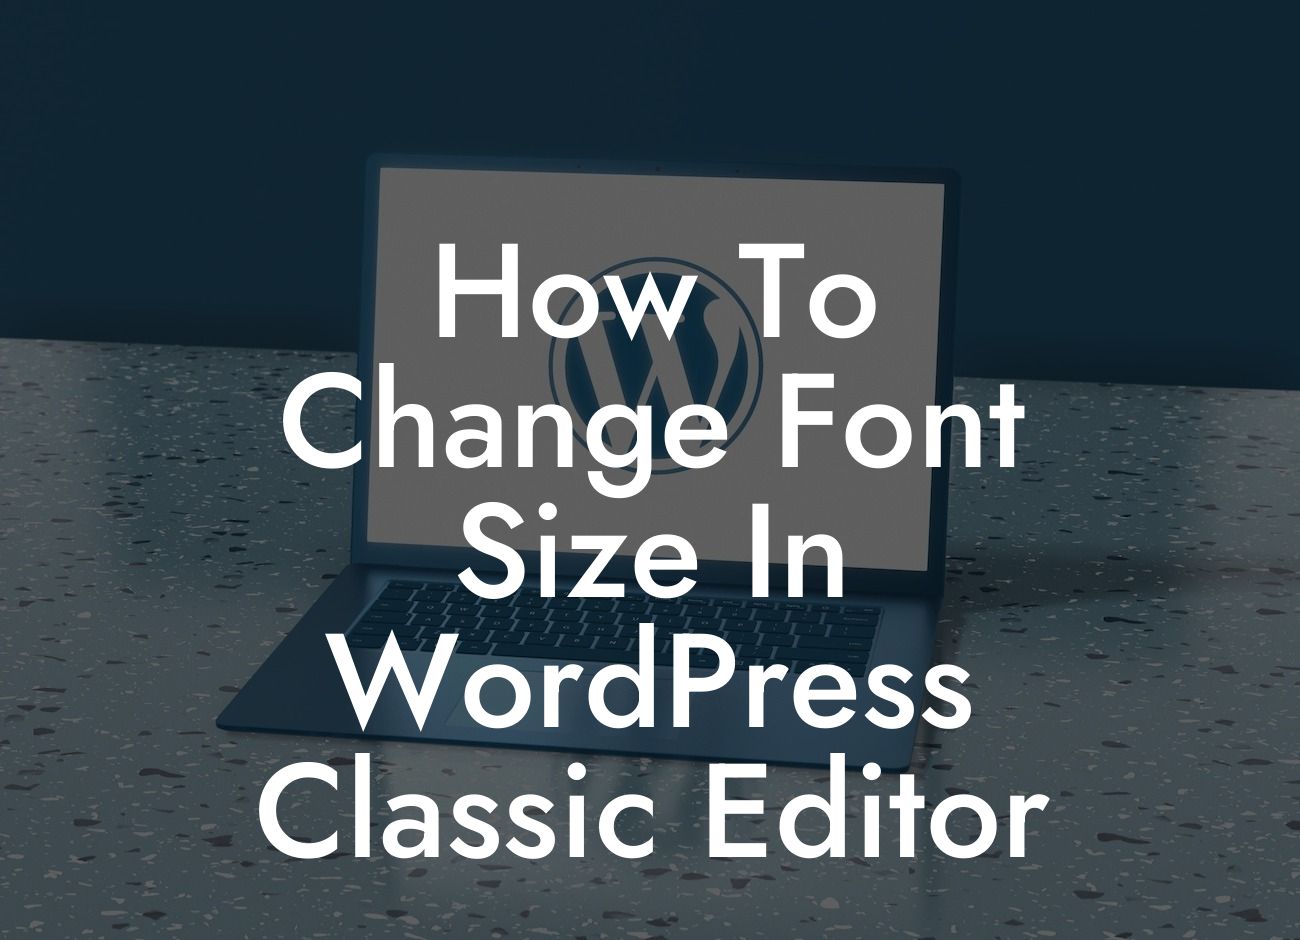 How To Change Font Size In WordPress Classic Editor